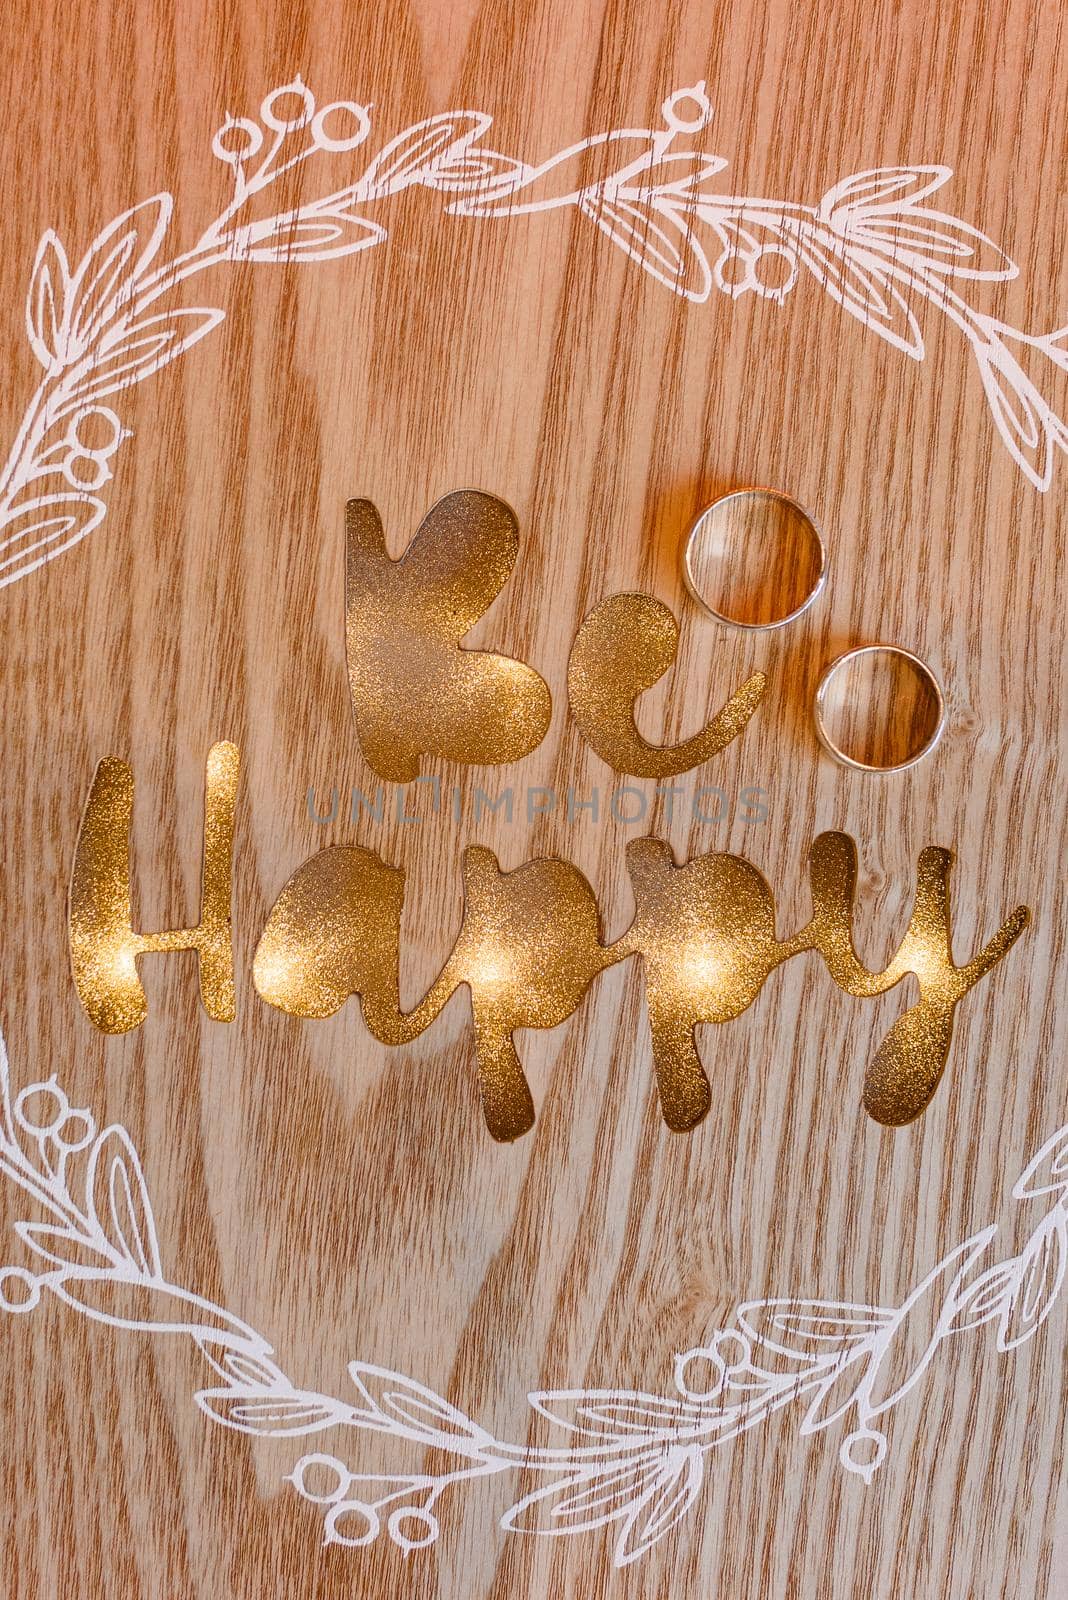 Wedding rings on a wooden background with golden inscription be happy and white pattern by Rabizo